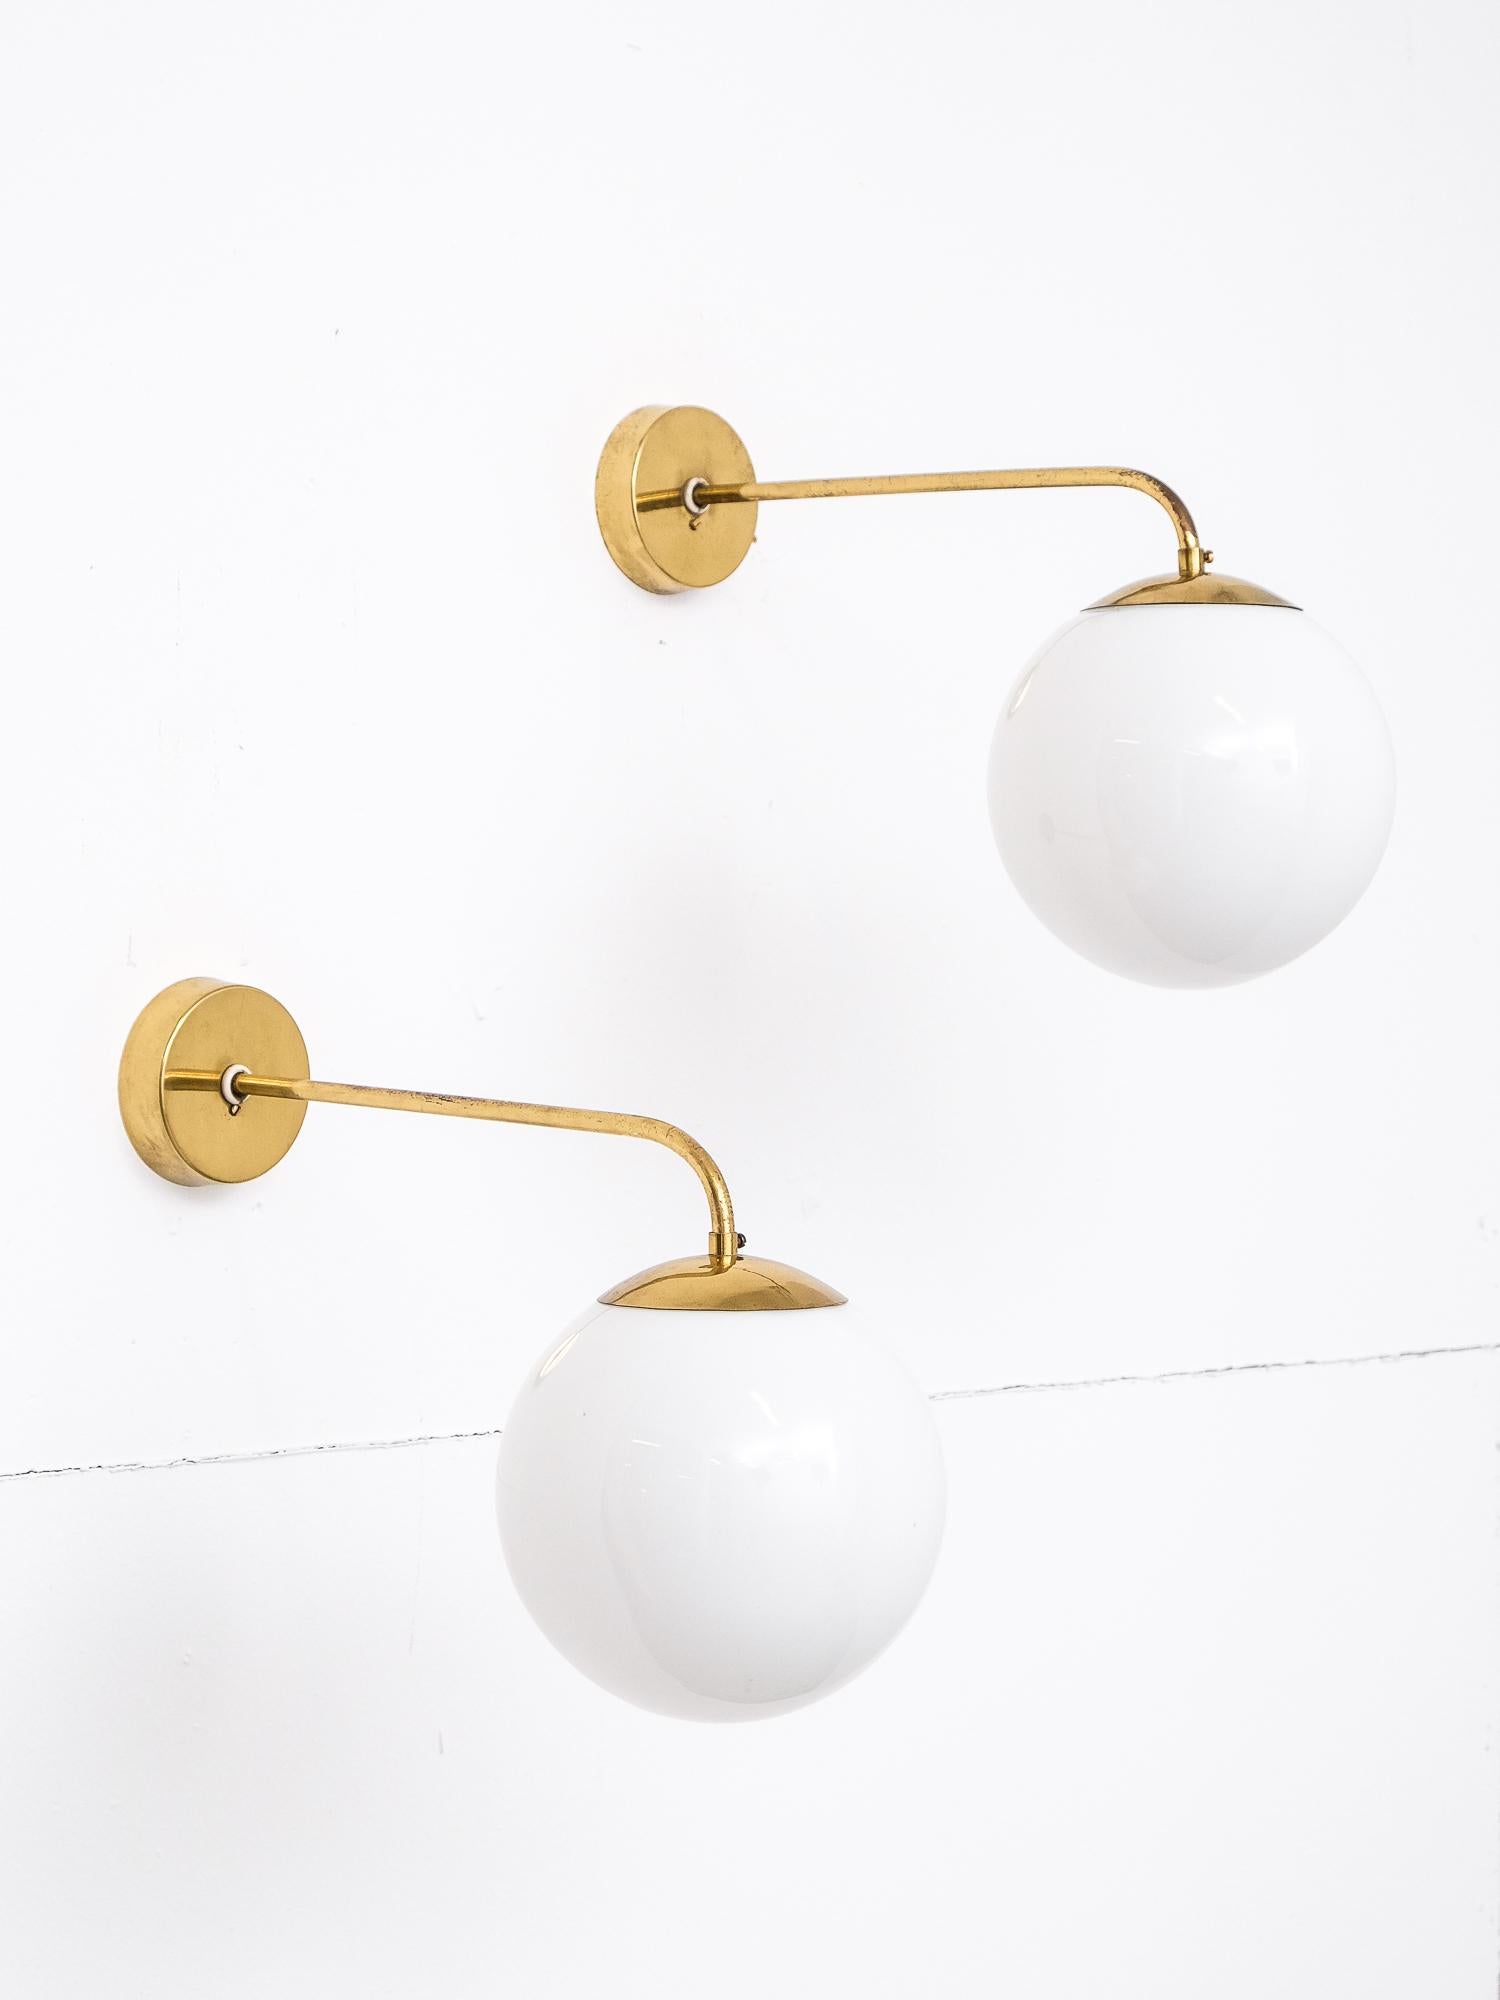 Pair of 1940s wall lamps in solid brass and white opaline glass produced by Idman in Finland.